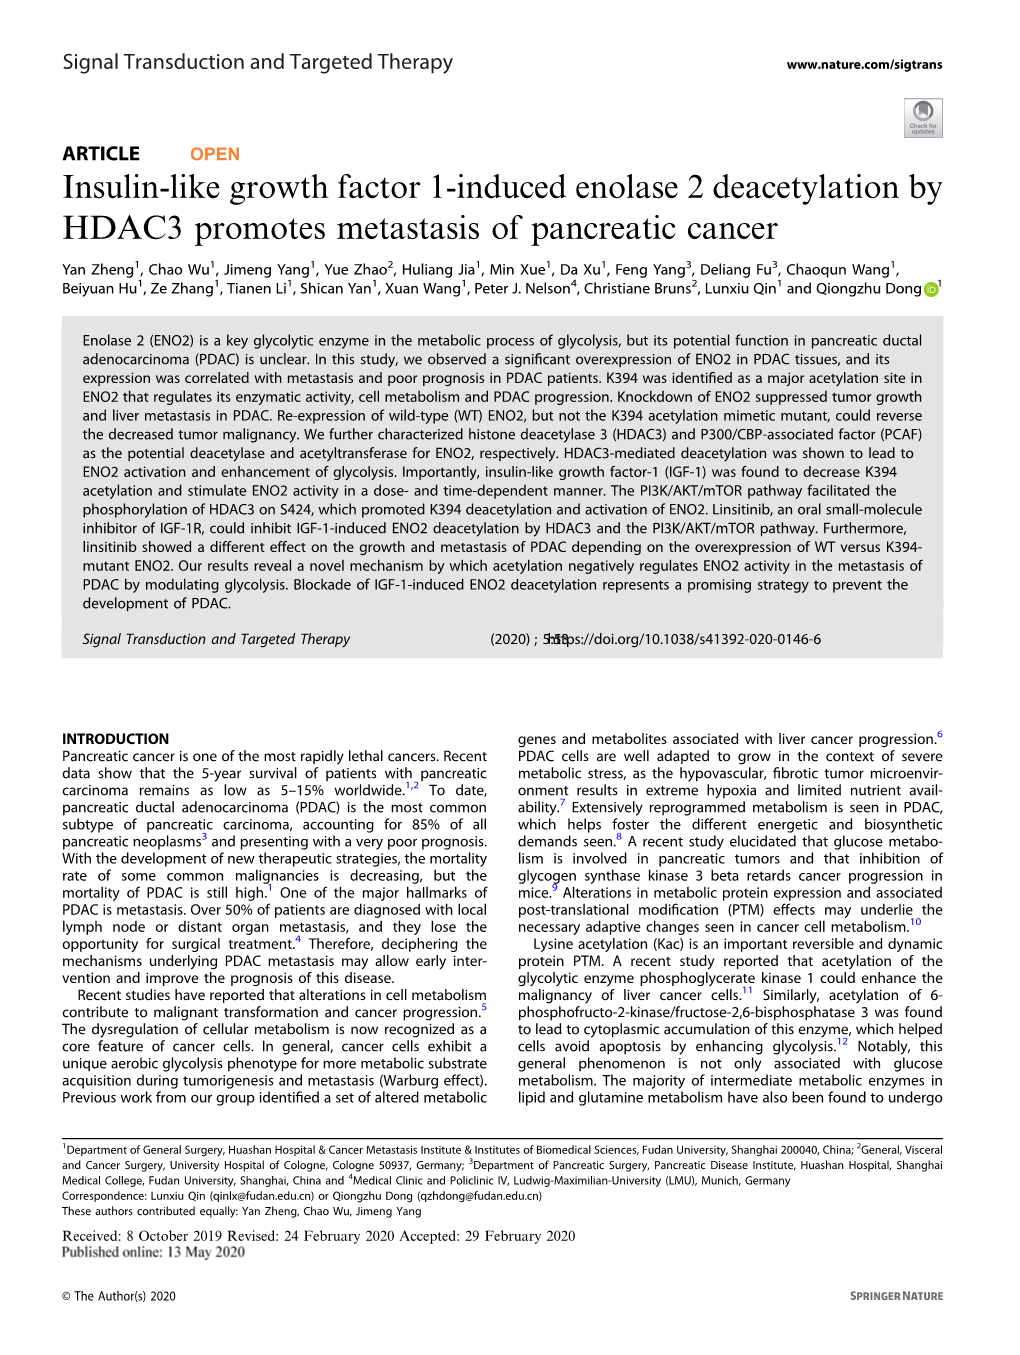 Insulin-Like Growth Factor 1-Induced Enolase 2 Deacetylation by HDAC3 Promotes Metastasis of Pancreatic Cancer